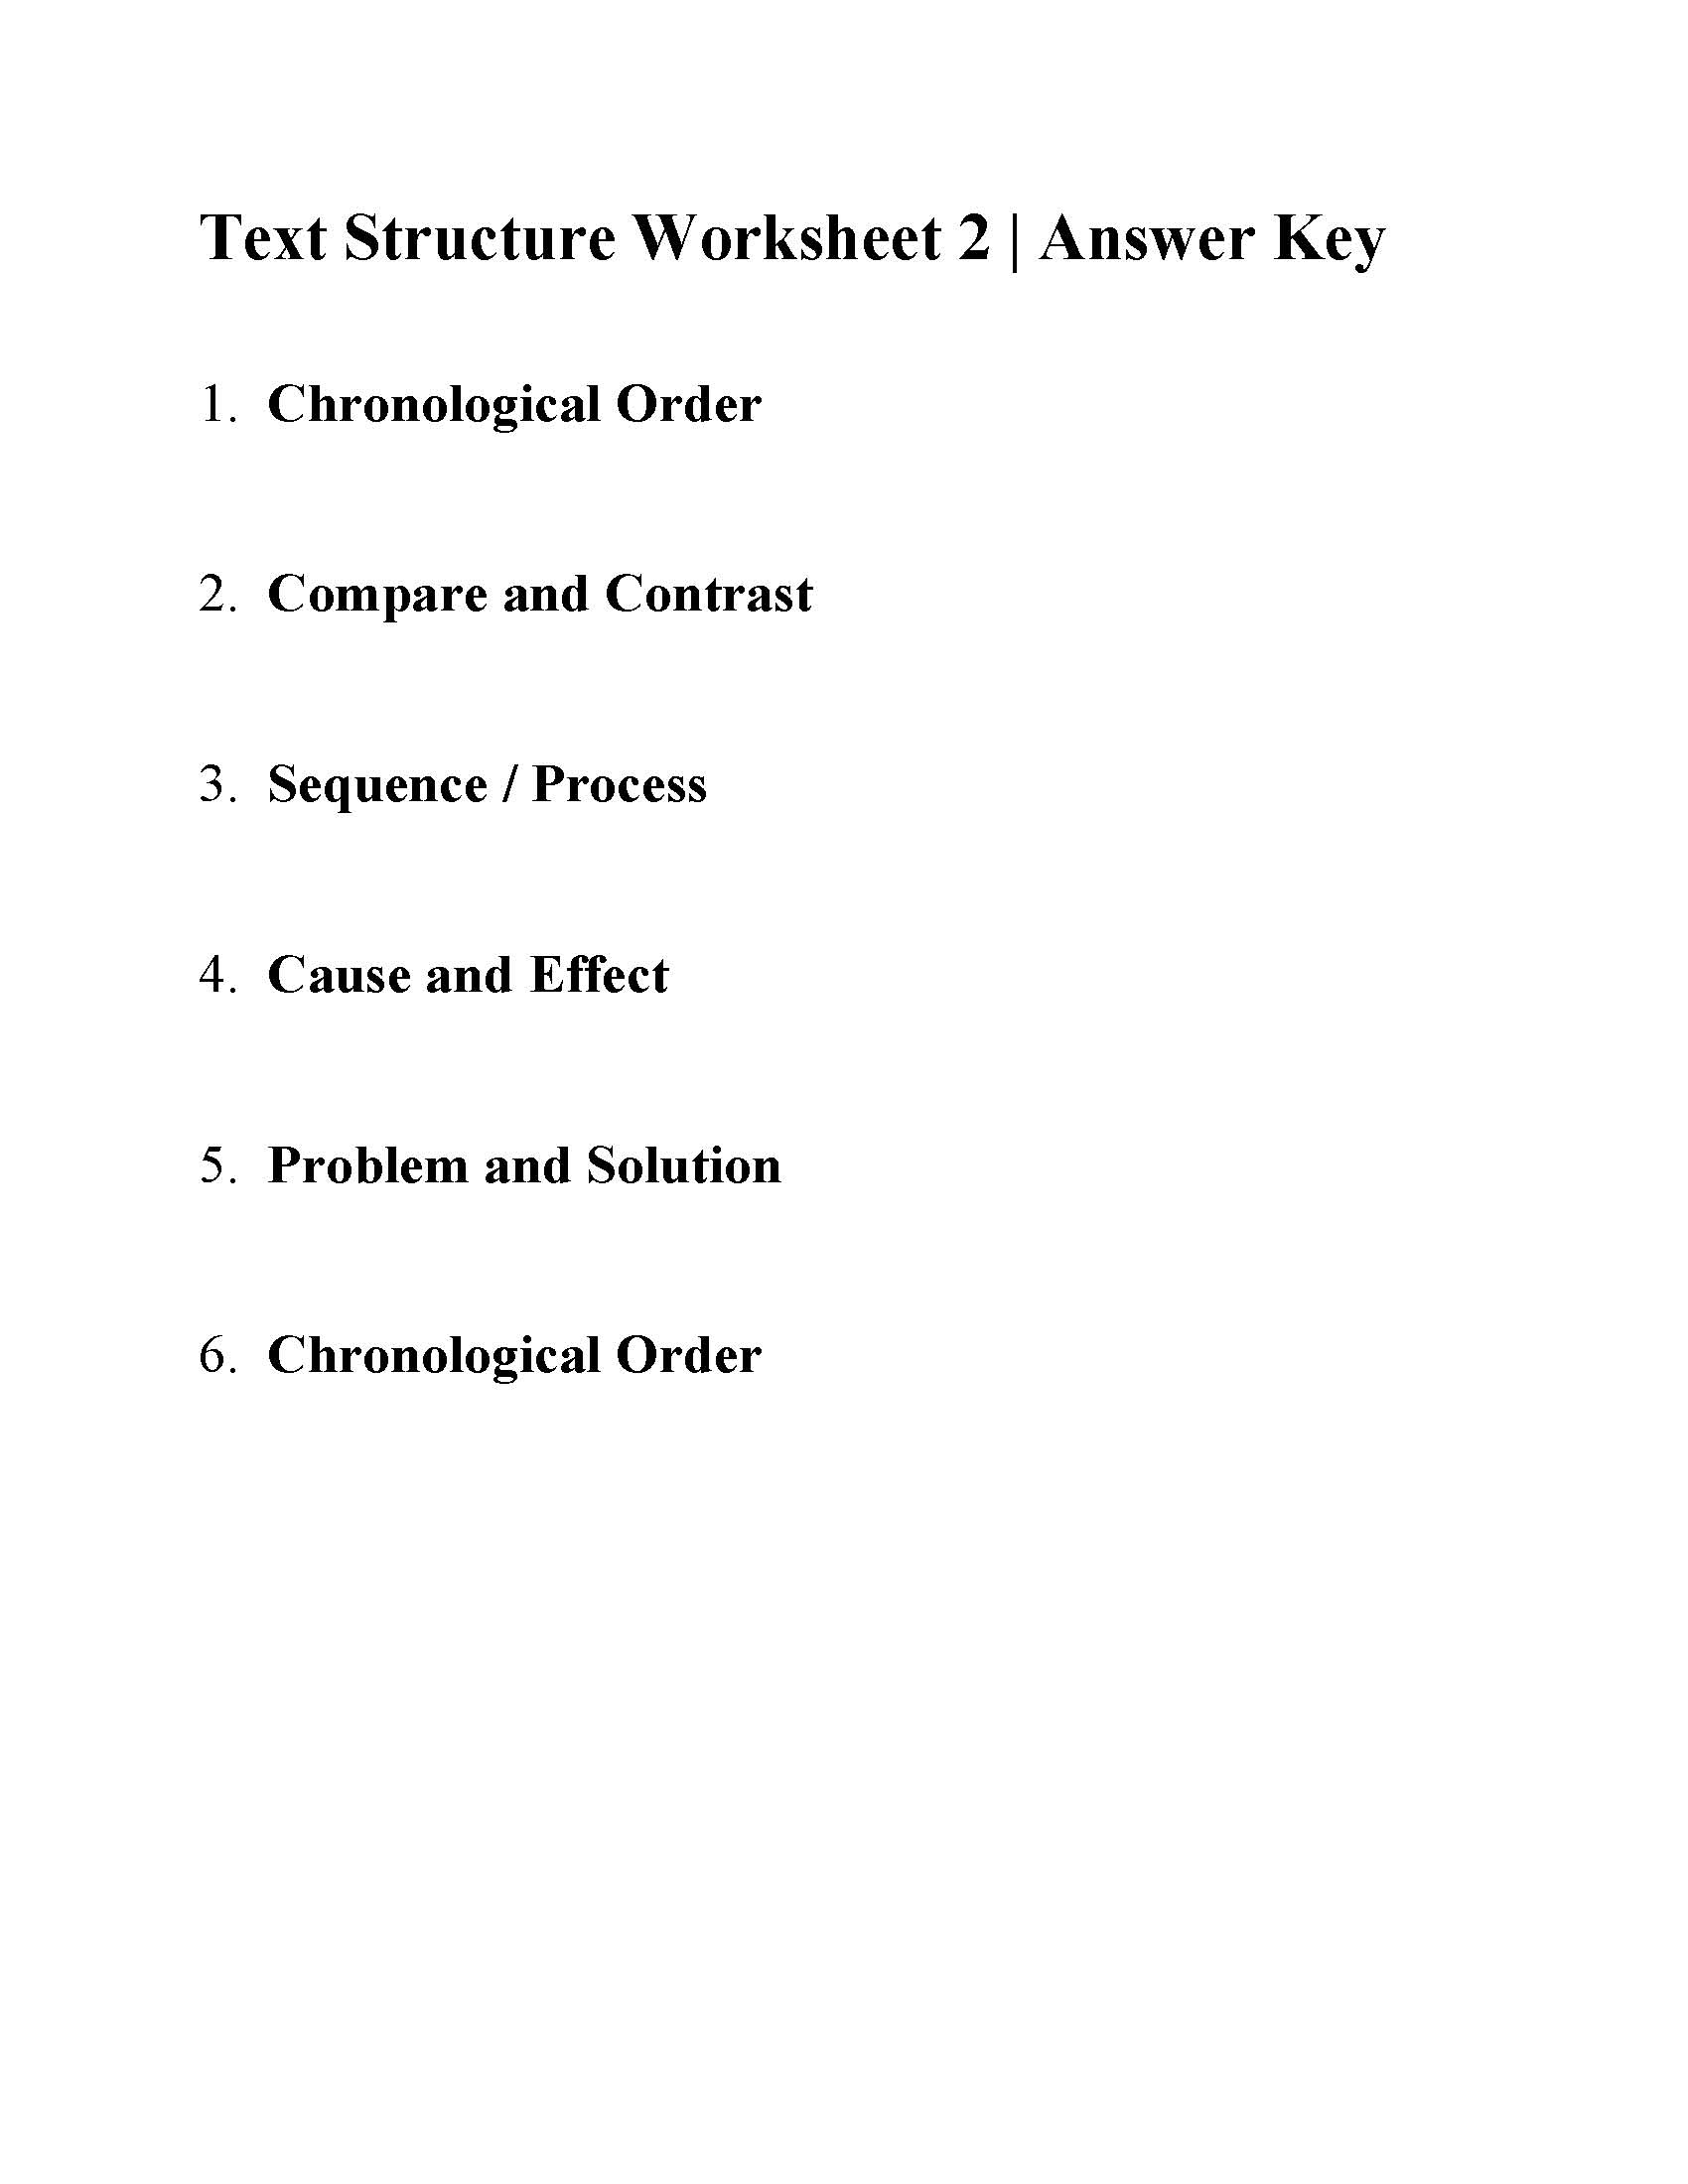 This is the answer key for the Text Structure Worksheet 2.